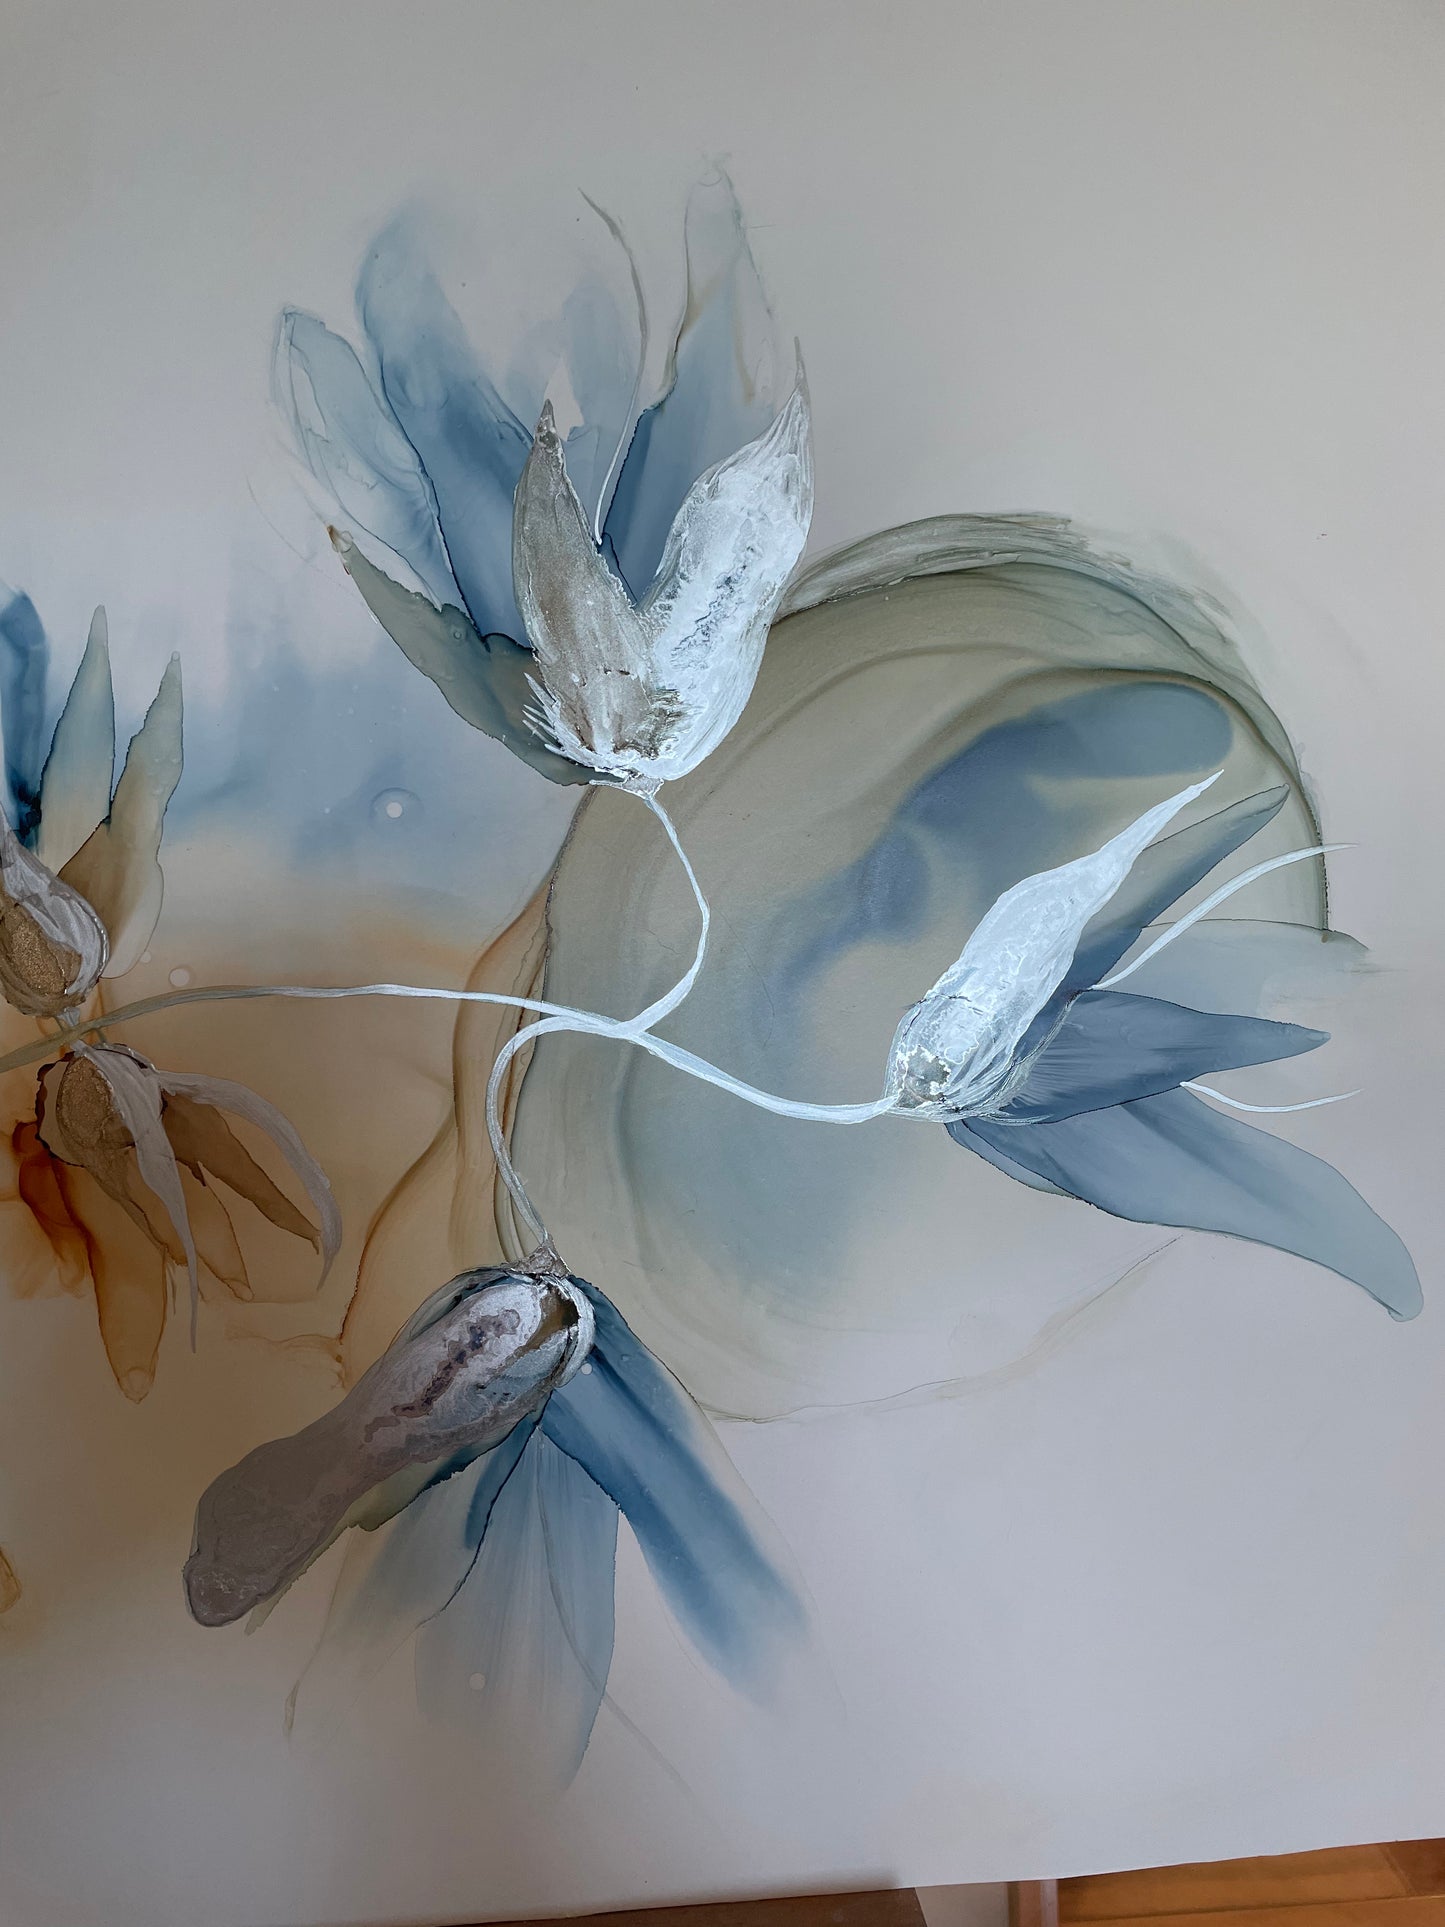 Fire and Ice - Original floral alcohol ink flowers in copper and blue.